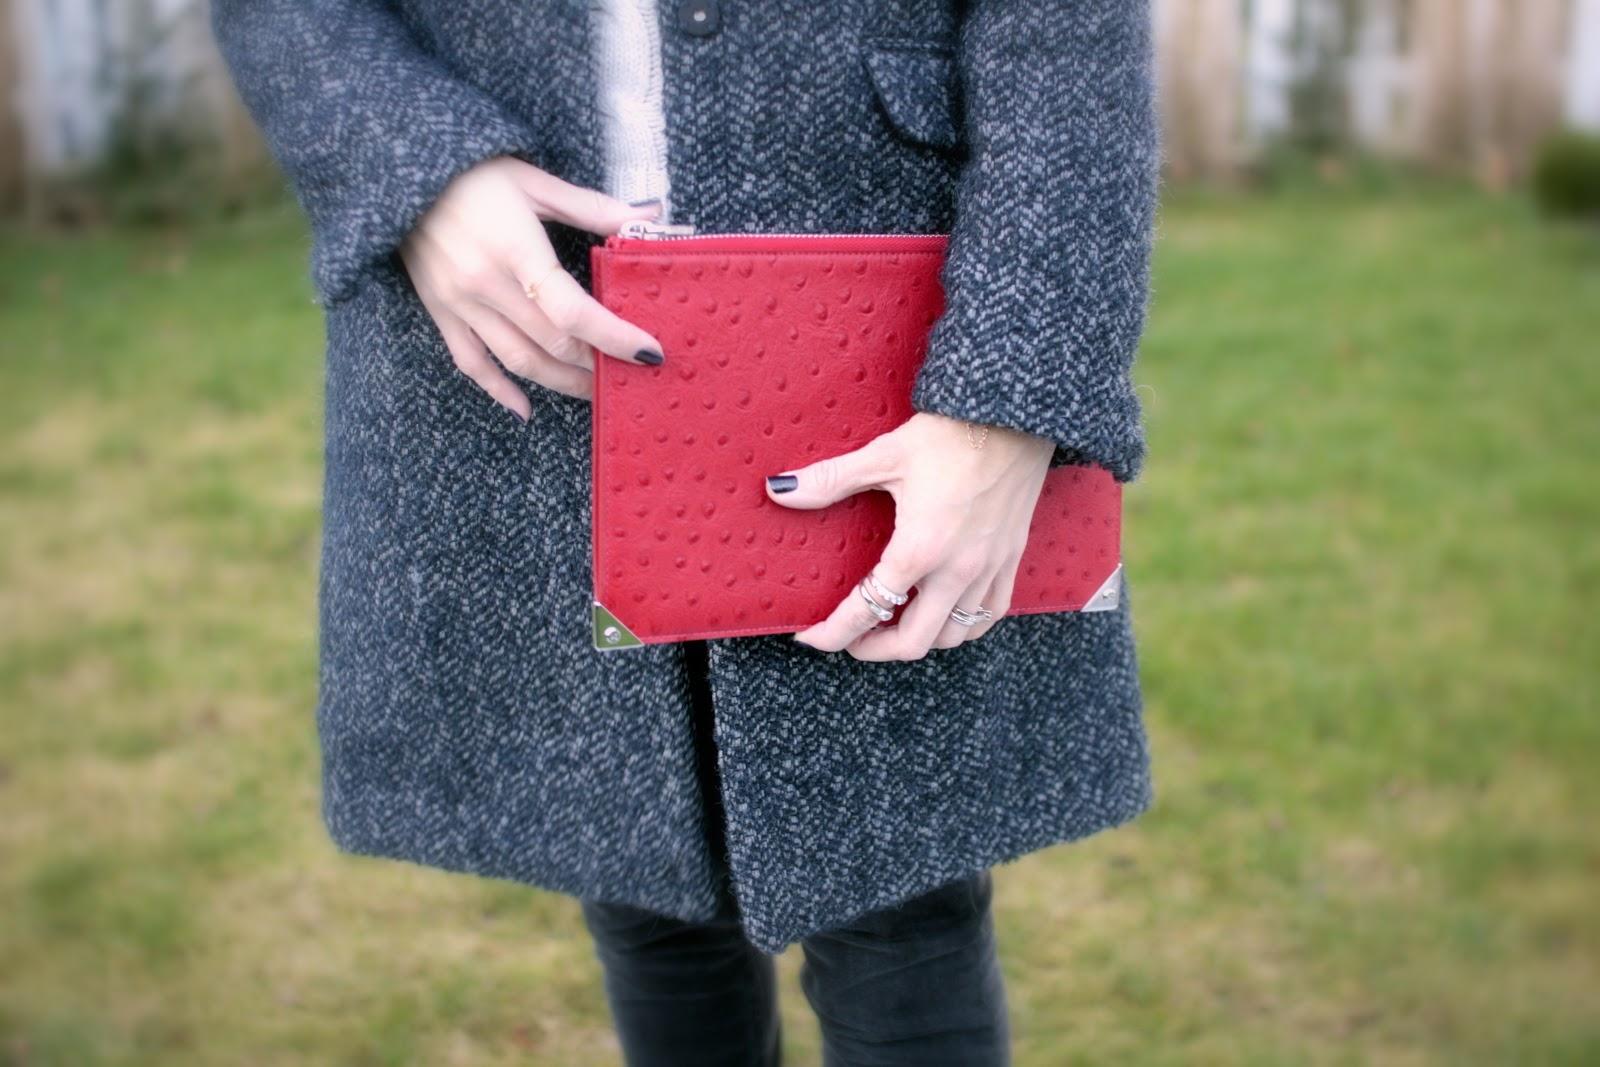 The dark grey jeans and the bright red clutch